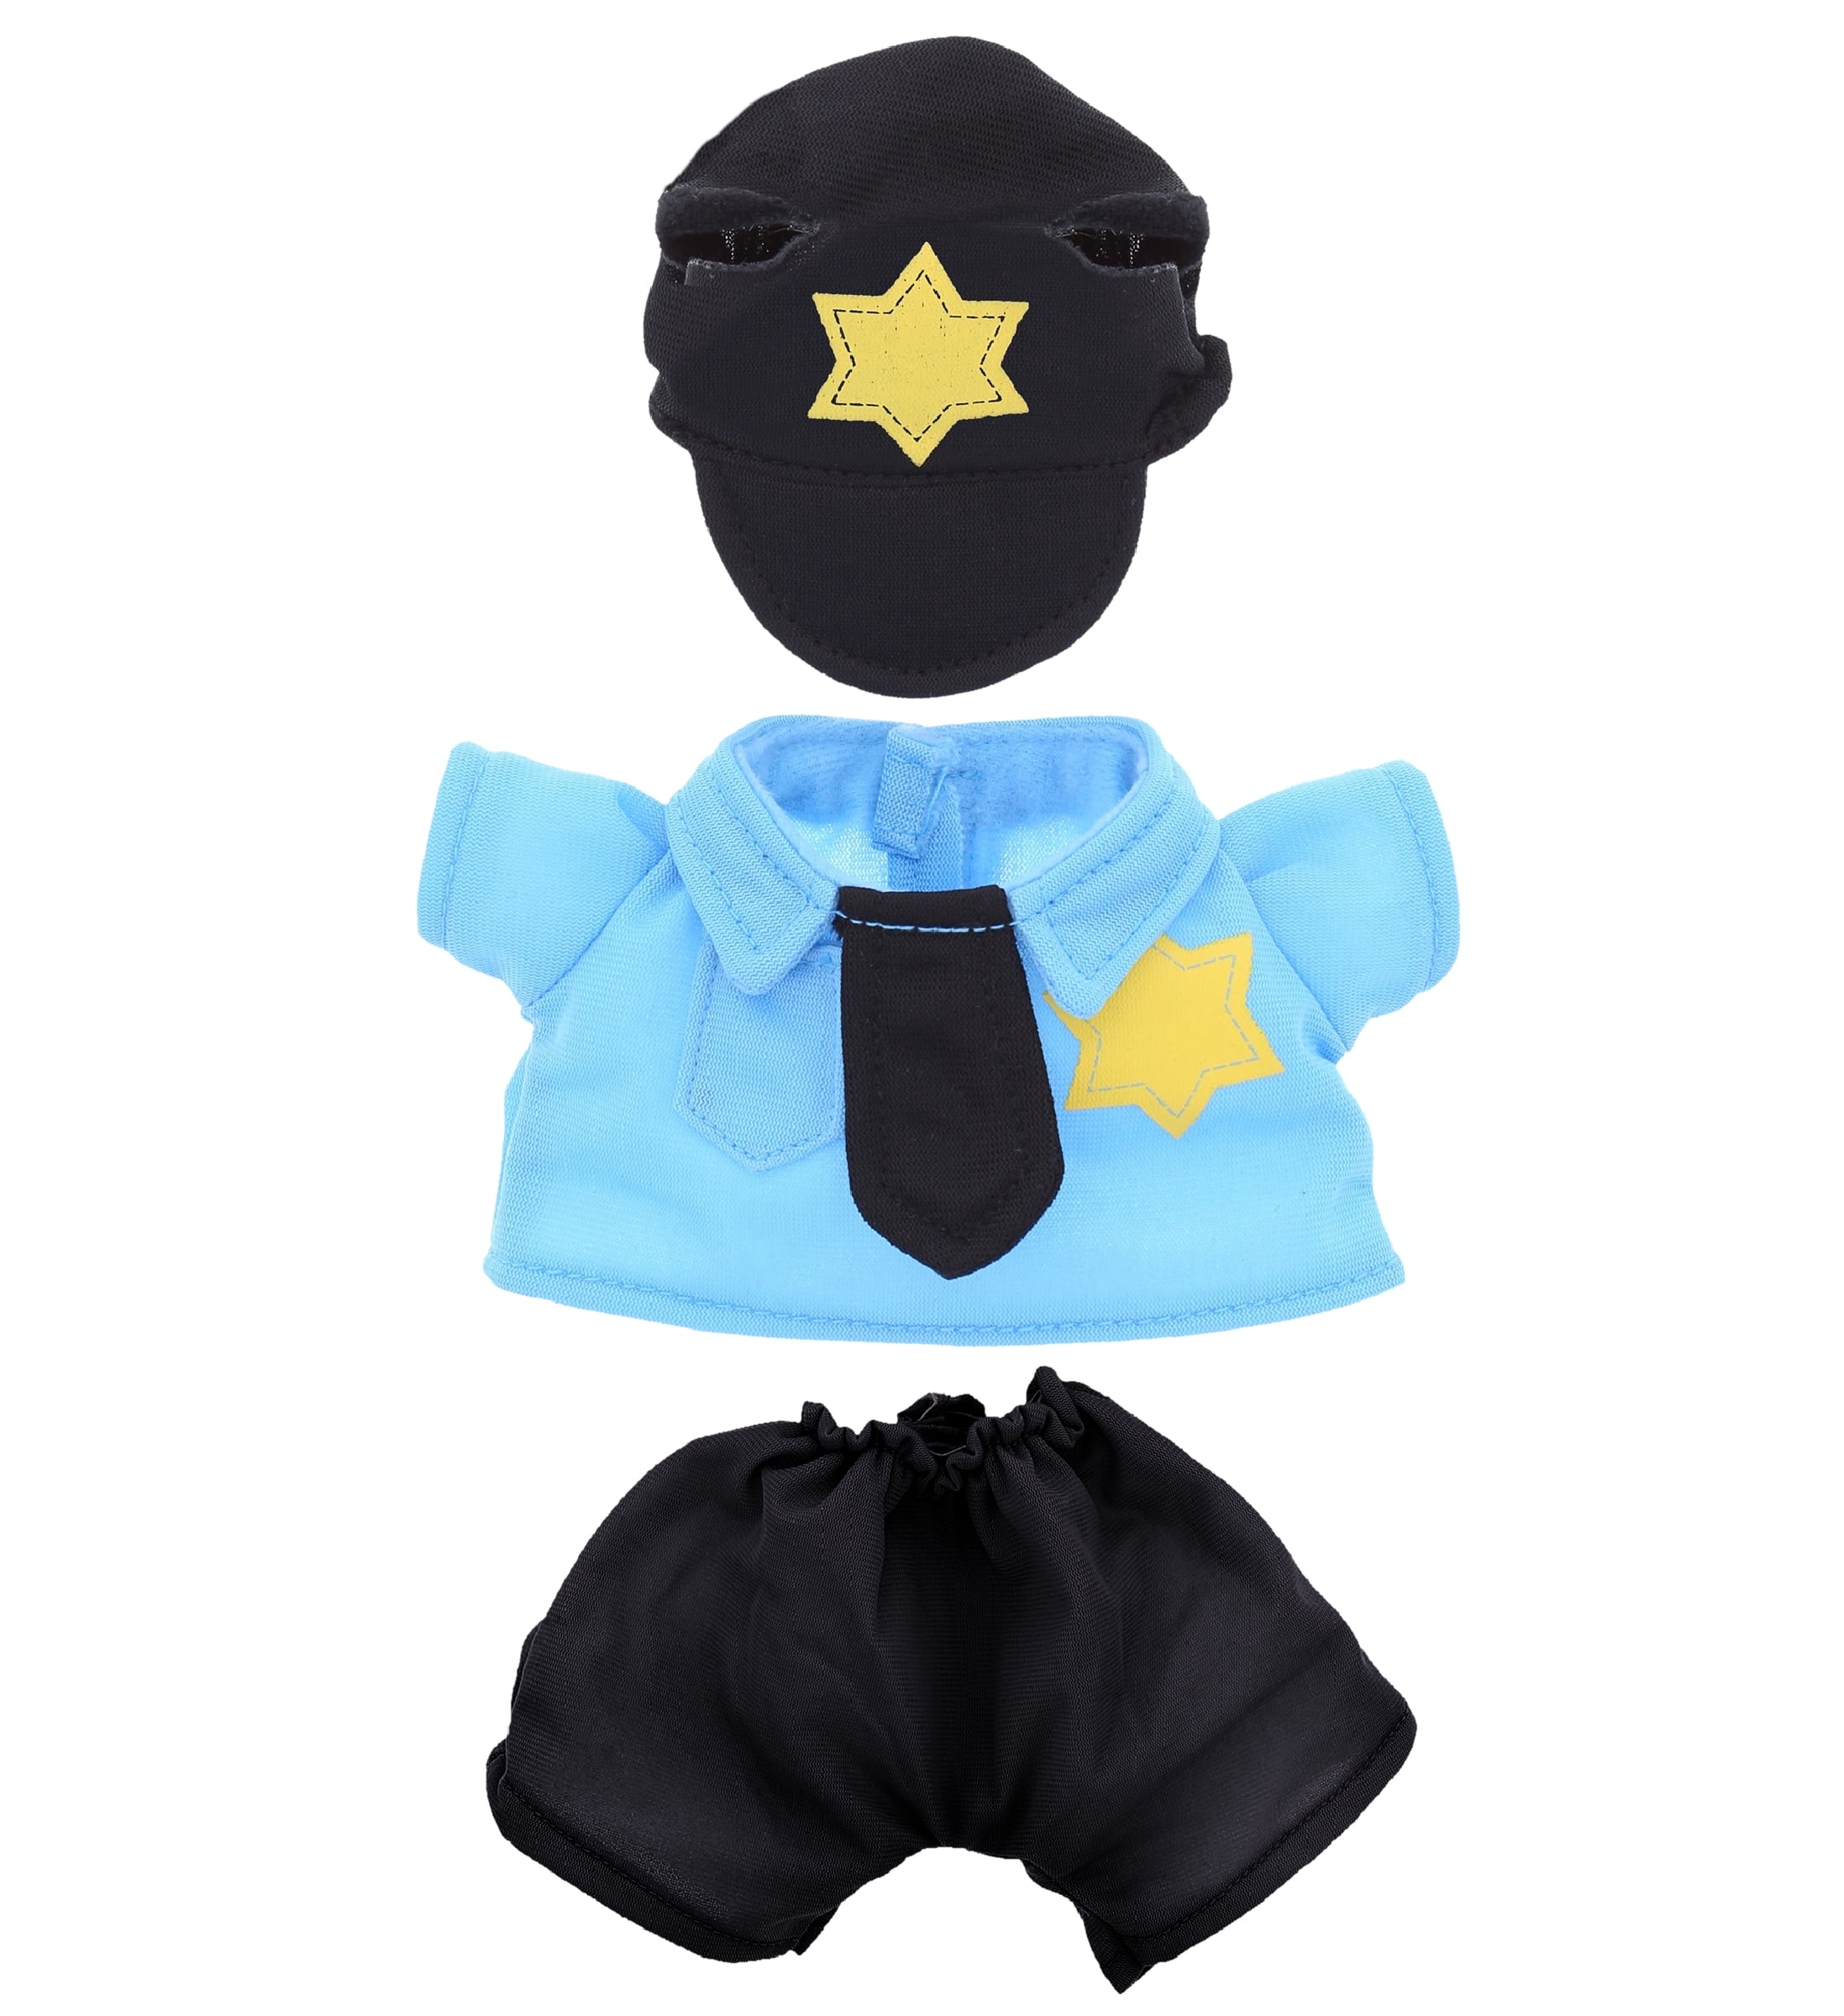 DolliBu Police Officer Dress Up Set for Teddy Bear Plush Toy - Police  Outfit for Stuffed Animals, Cute Set of Police Hat, Shirt, & Pants for Teddy  Bear Costume, Stuffed Animal Clothes -